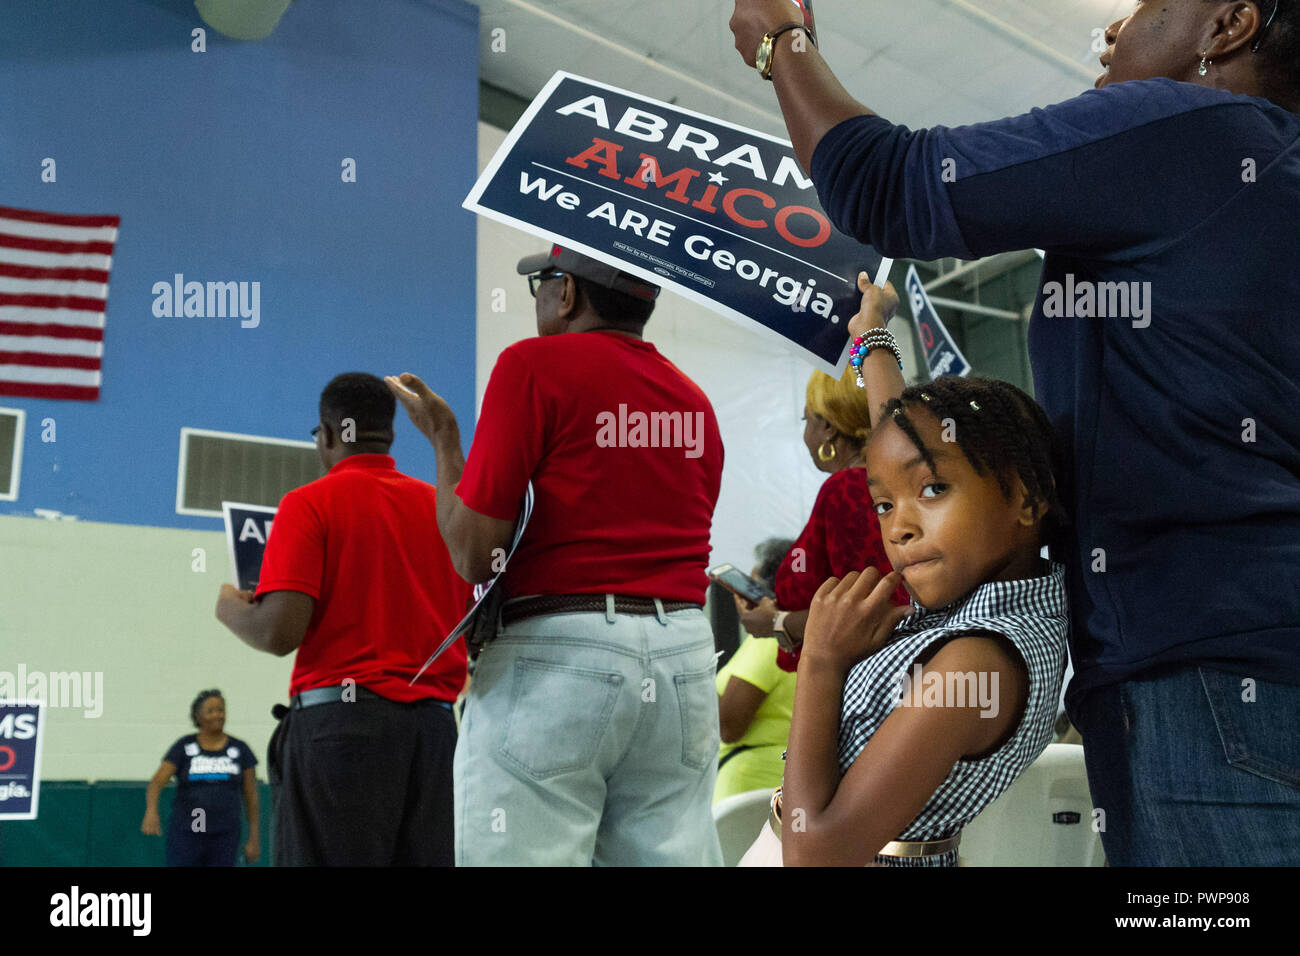 Thompson, Georgia, USA. 17th Oct 2018. Stacey Abrams bus tour through rural Georgia stopped in Grovetown on October 17th. Abrams is traveling the state encouraging folks to vote early. Credit: Cindy Brown/Alamy Live News Stock Photo